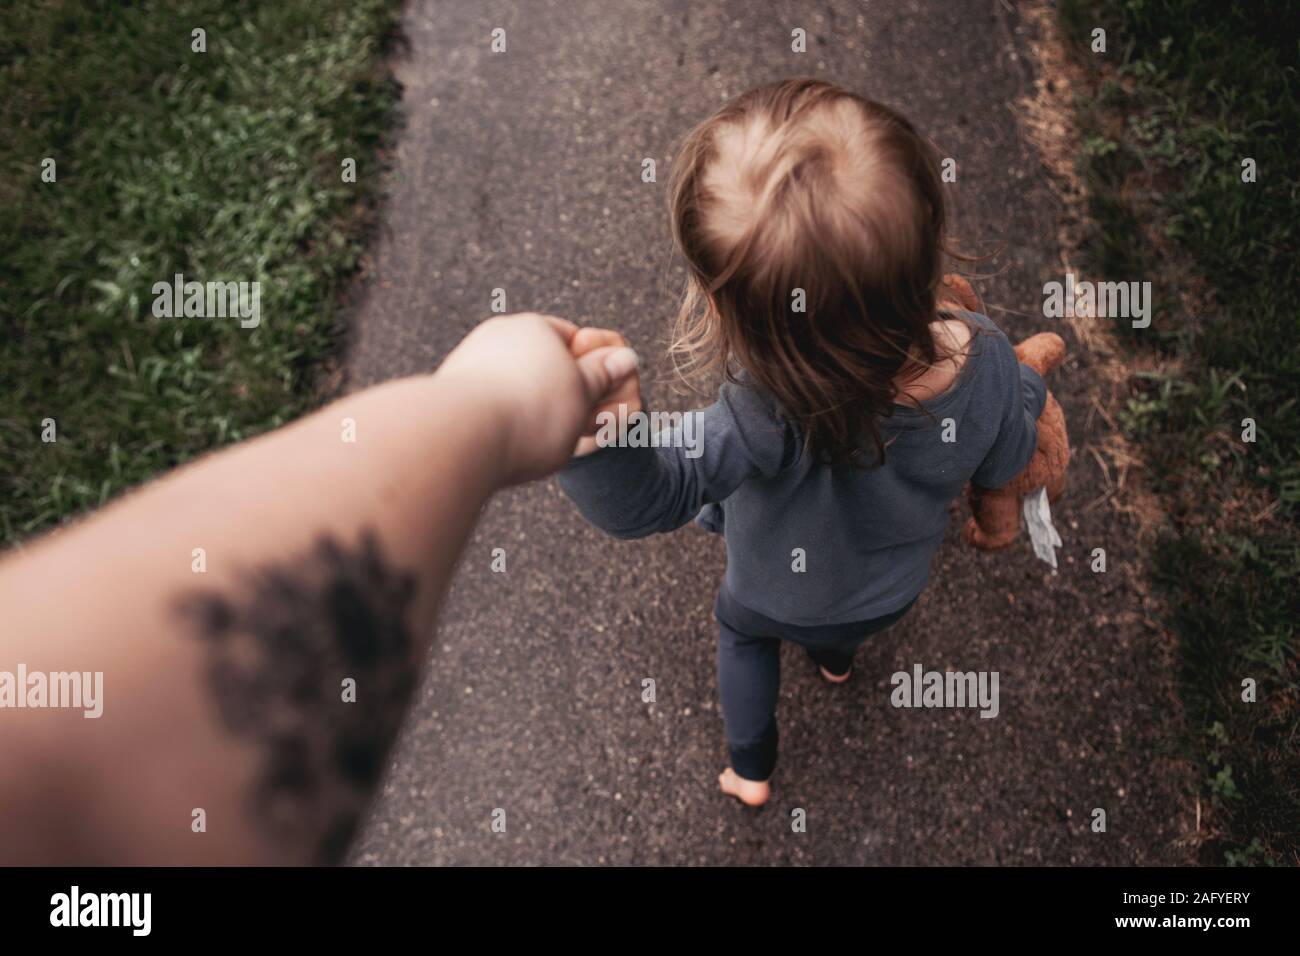 holding hands and walking down the street Stock Photo